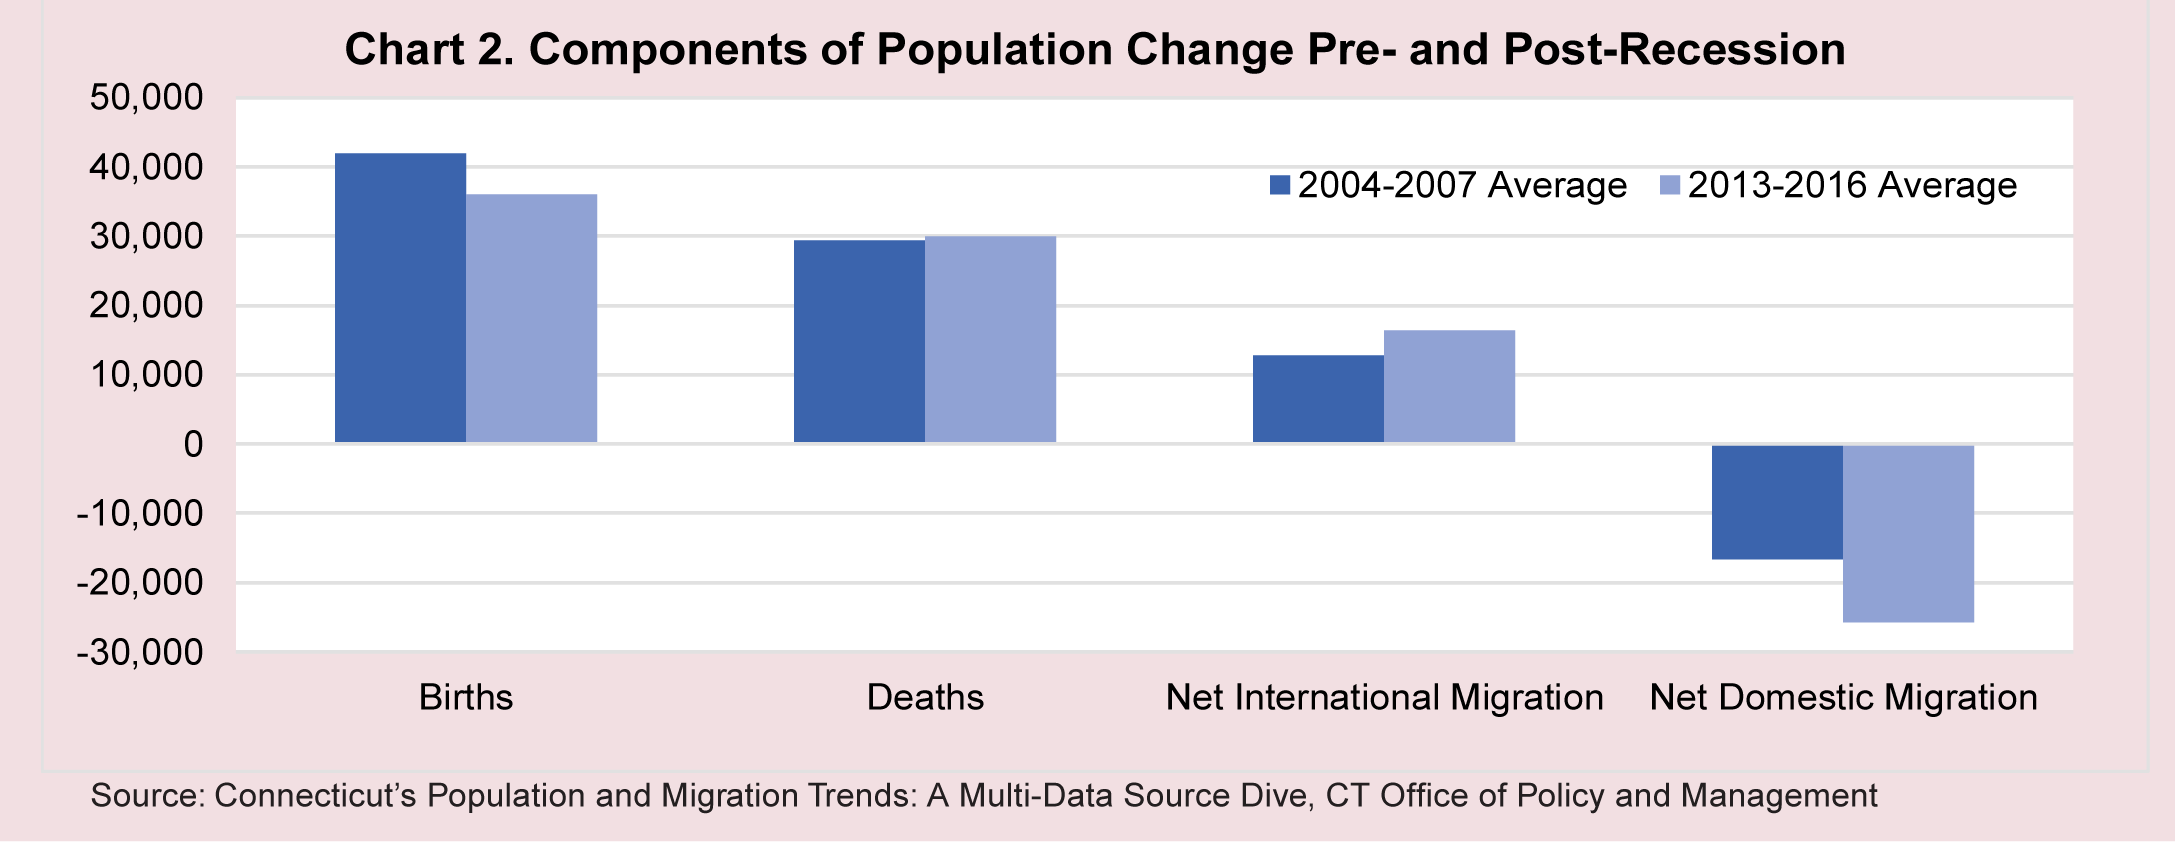 Chart 2. Components of Population Change Pre- and Post-Recession